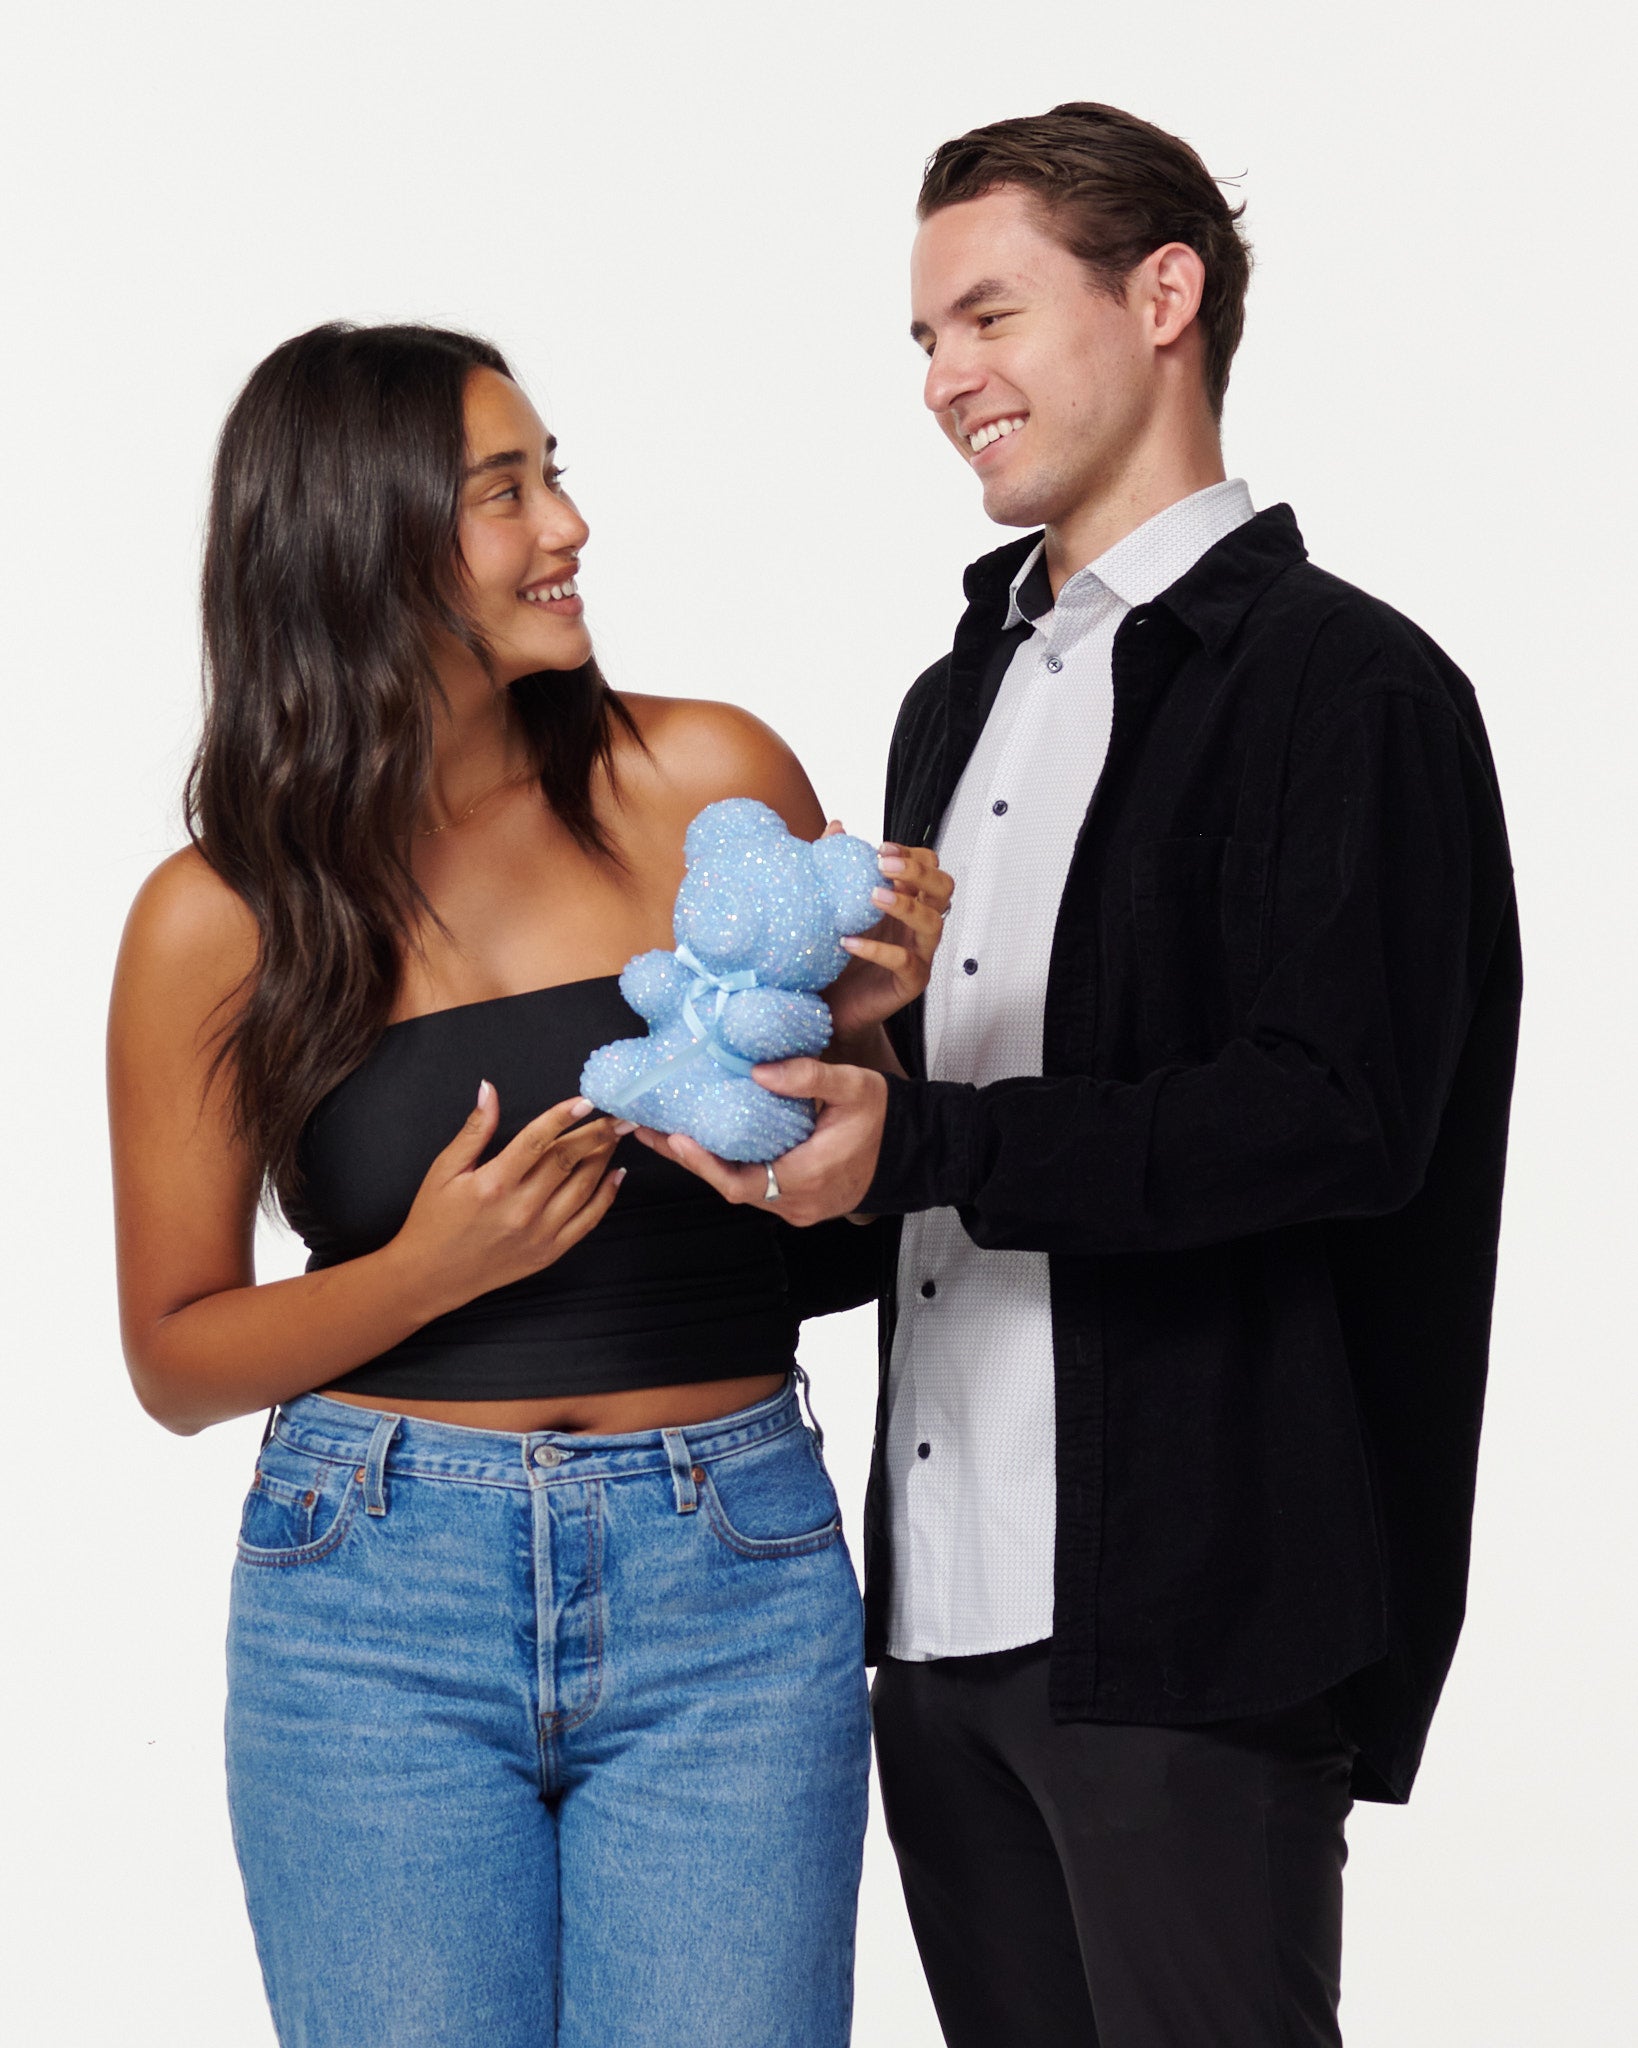 A woman in a black cropped top and blue jeans holds a blue, sparkly teddy bear, looking at it with a smile. Next to her, a man in a black jacket over a white shirt smiles as he looks at the teddy bear, his hands gently touching it. Both individuals appear engaged and happy with the teddy bear.